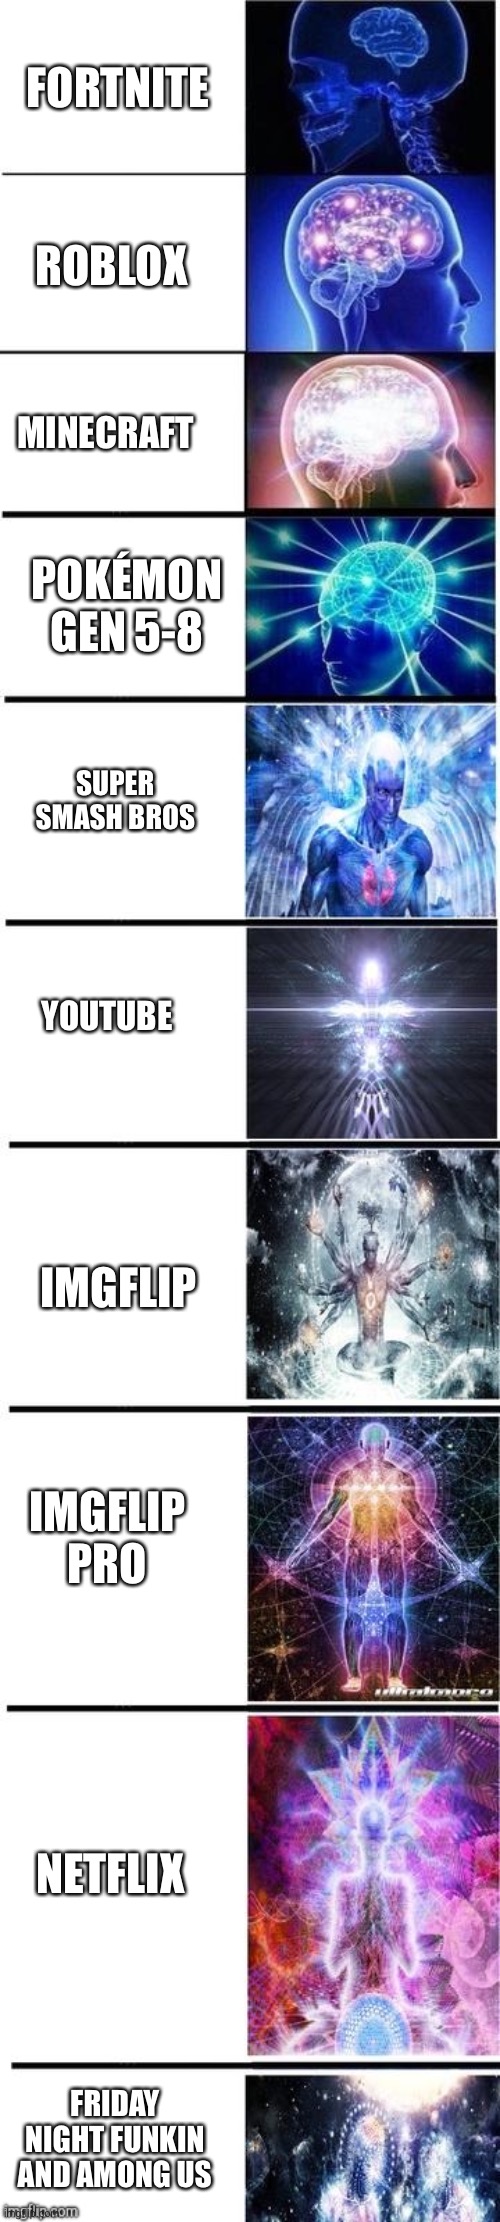 This is part 2 of my original 7 panel one | FORTNITE; ROBLOX; MINECRAFT; POKÉMON GEN 5-8; SUPER SMASH BROS; YOUTUBE; IMGFLIP; IMGFLIP PRO; NETFLIX; FRIDAY NIGHT FUNKIN AND AMONG US | image tagged in expanding brain 10 panel,wow | made w/ Imgflip meme maker